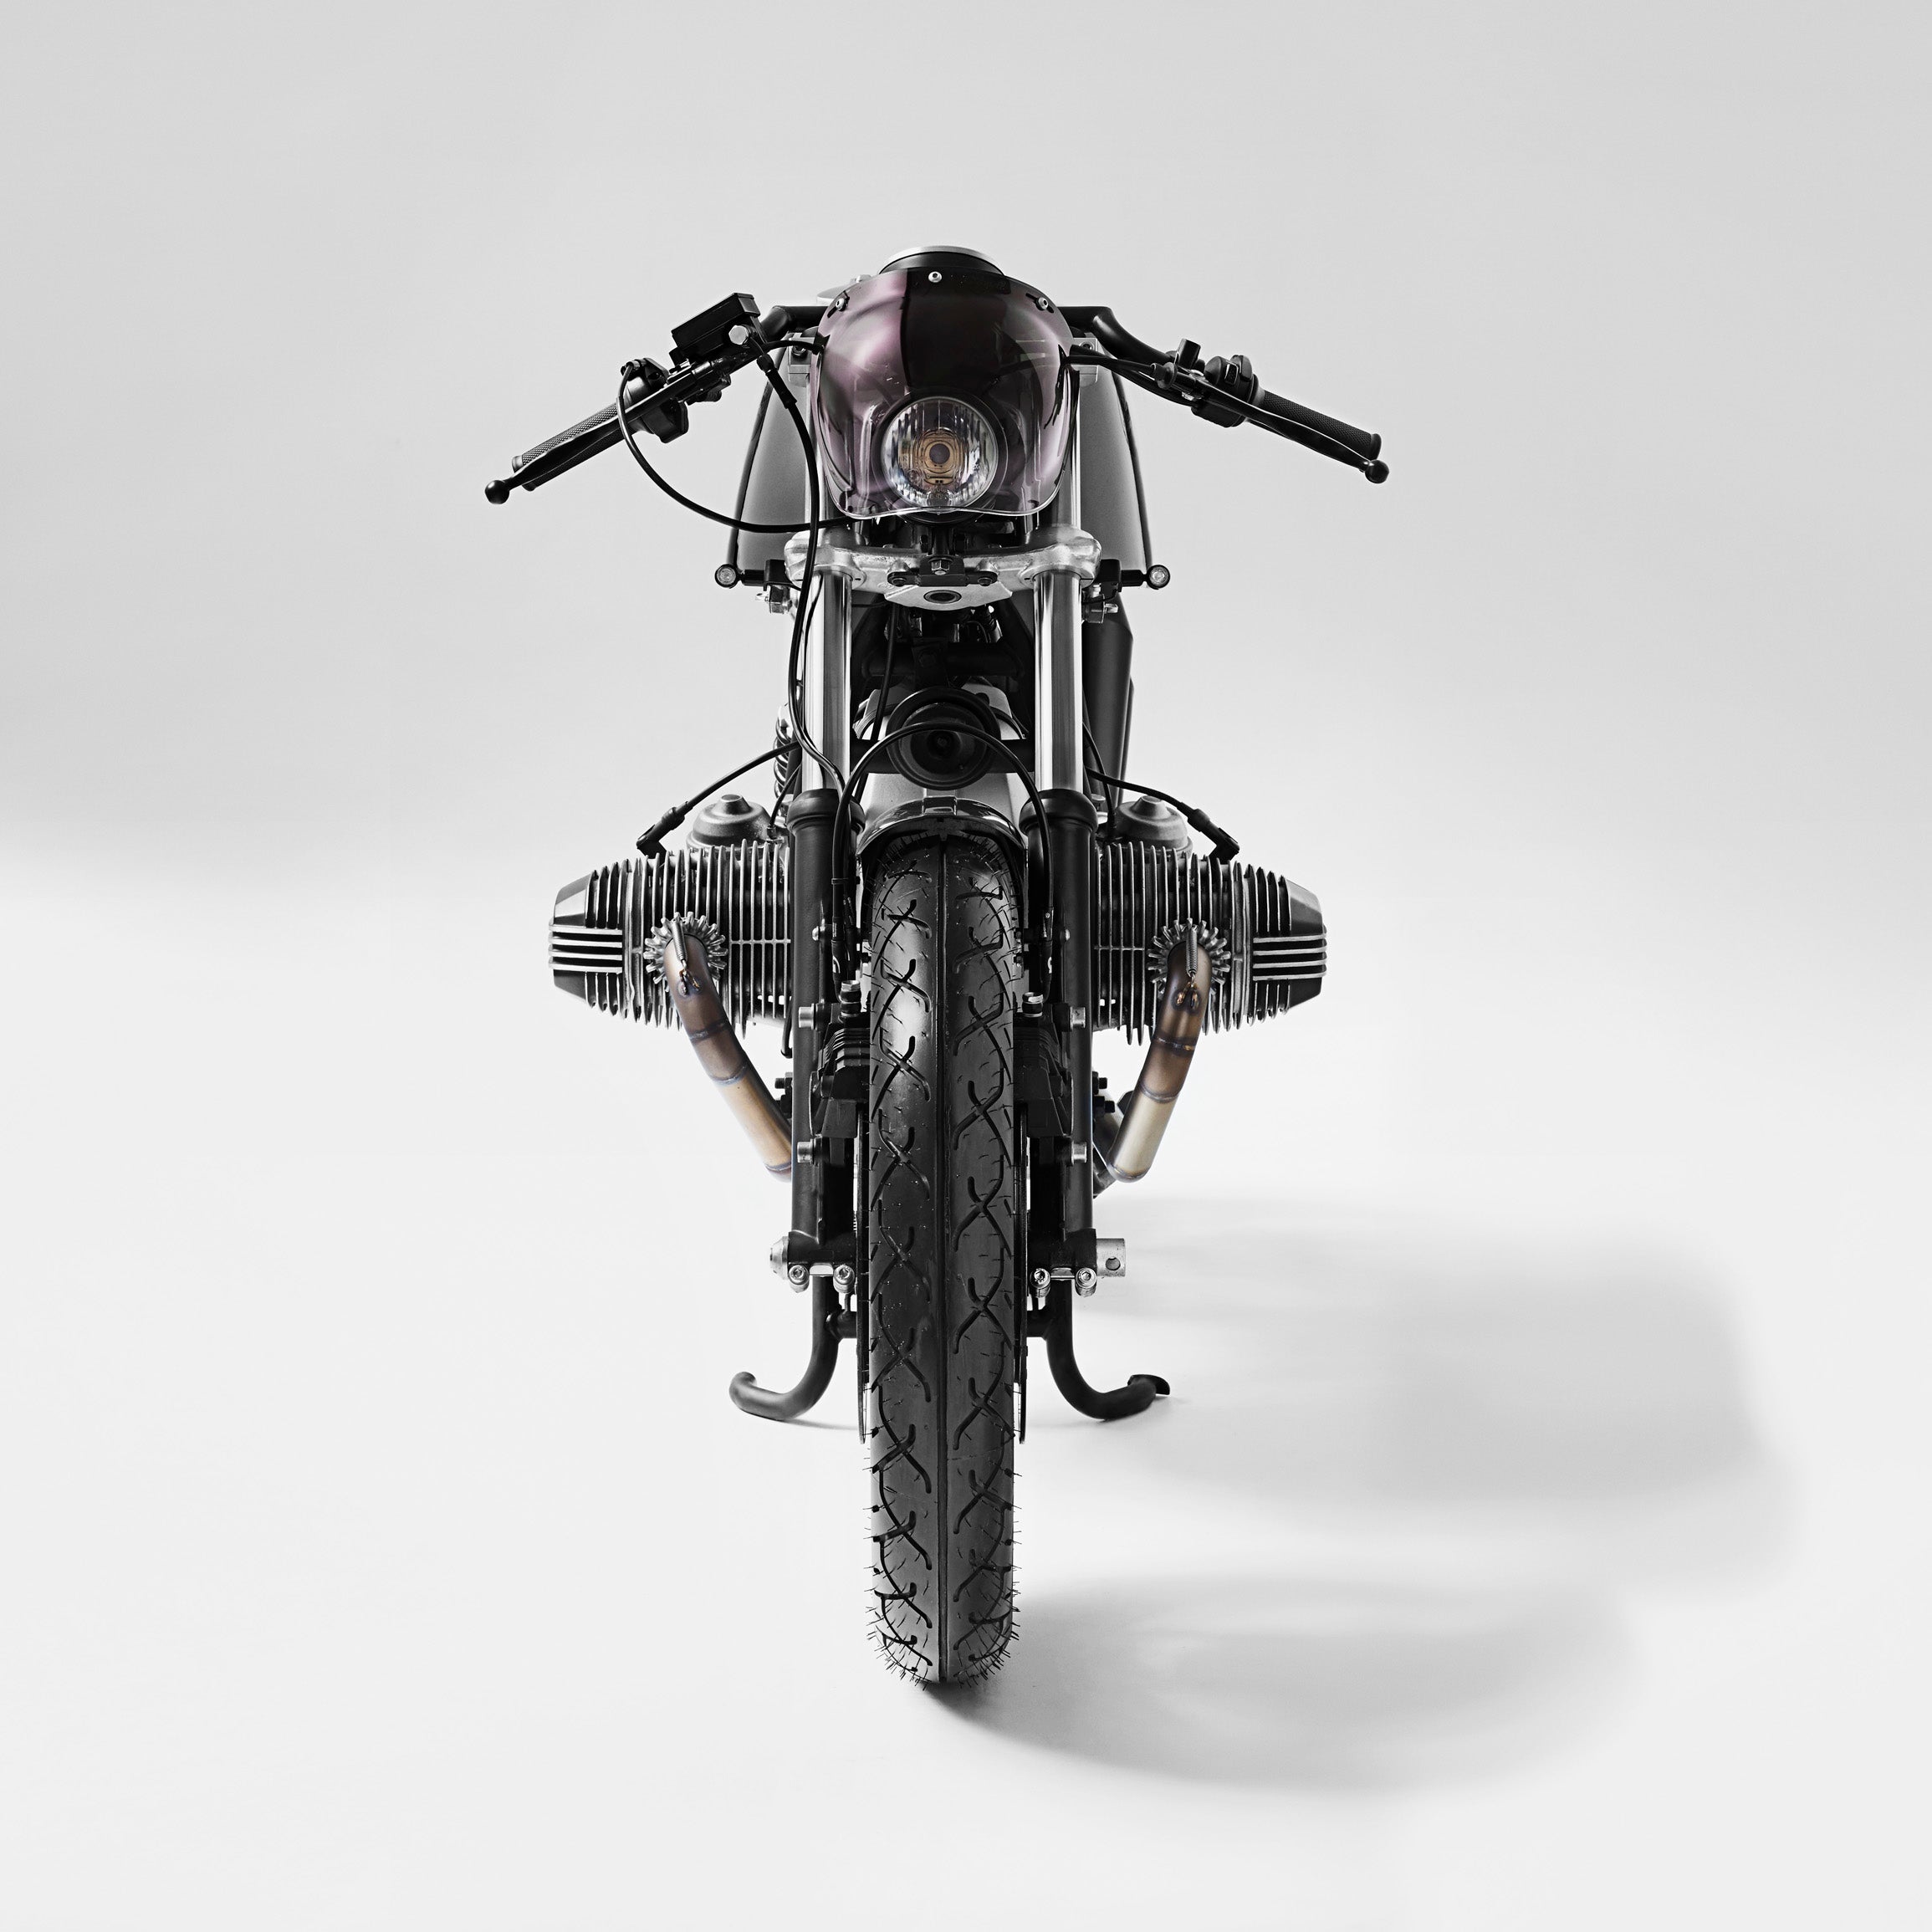 FUEL TBT - The Incredible FUEL R65 Racer – Fuel Motorcycles